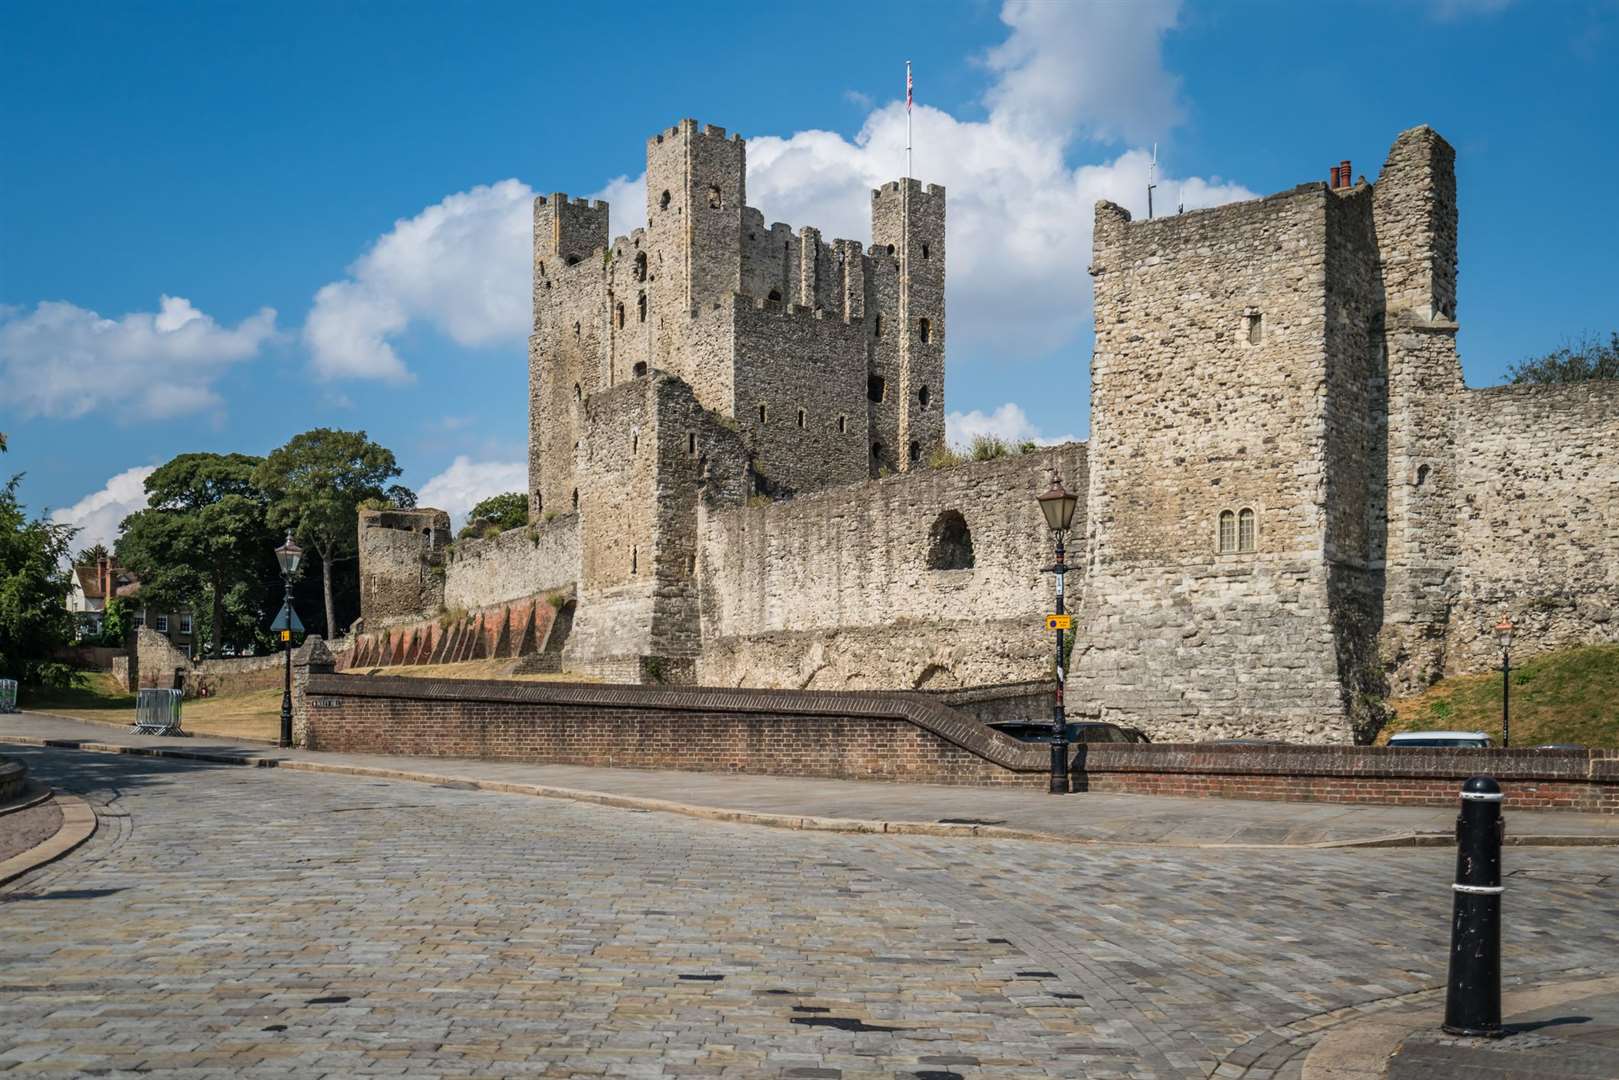 Medway Council, which manages the castle on behalf of English Heritage, says the closure is due to unforeseen circumstances